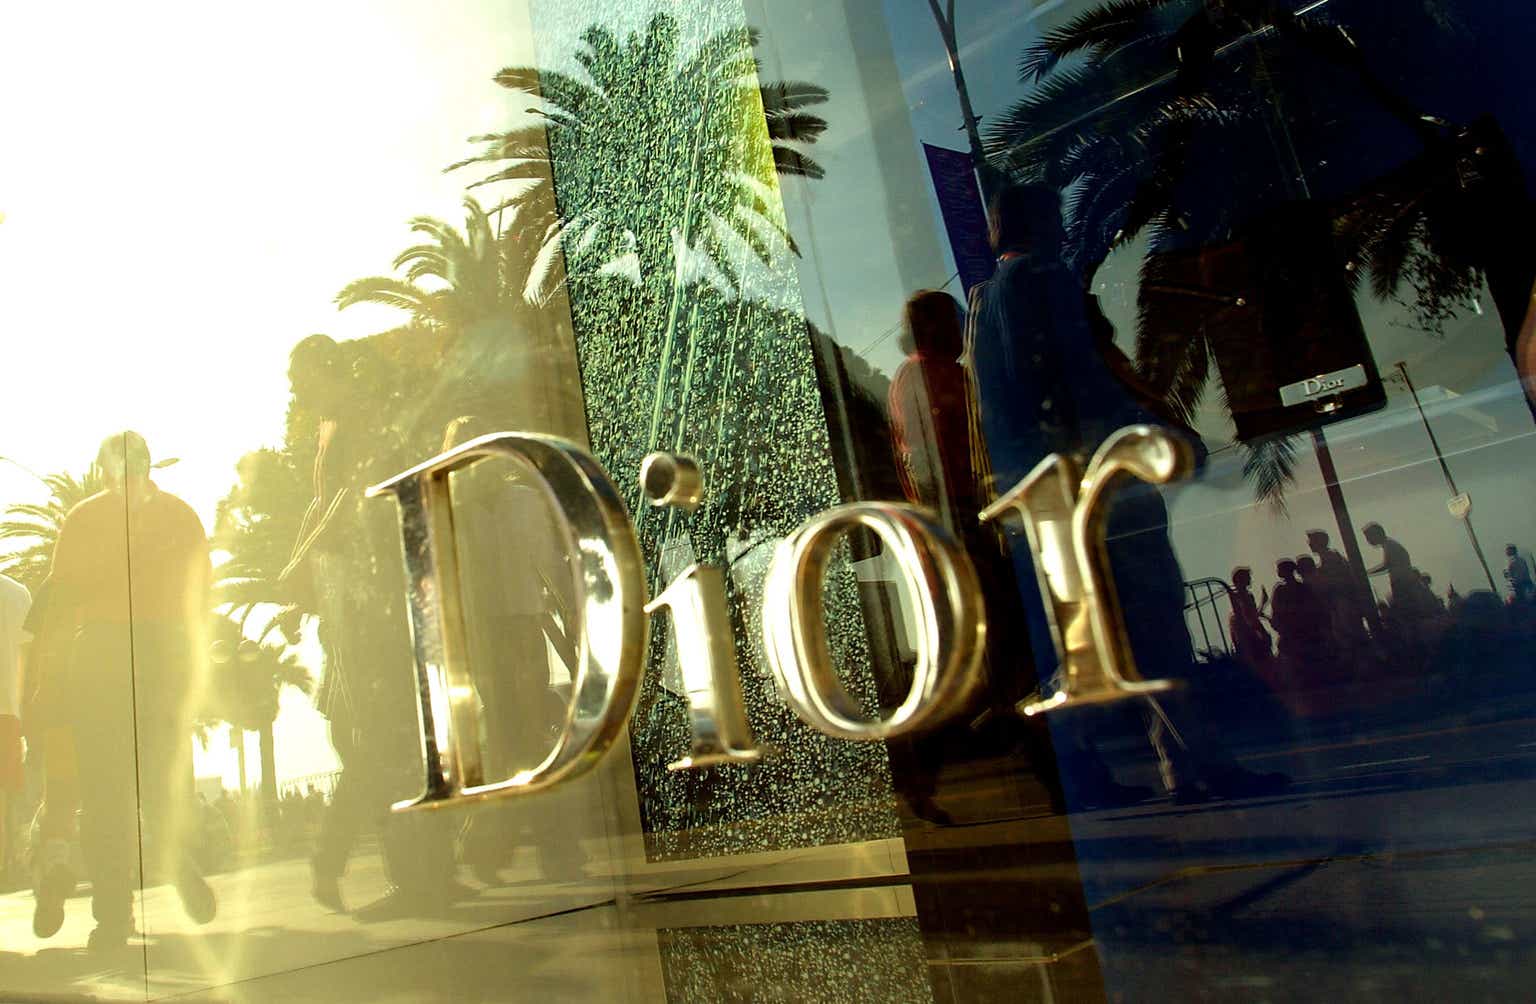 Christian Dior: A Better Way To Invest In Louis Vuitton (OTCMKTS